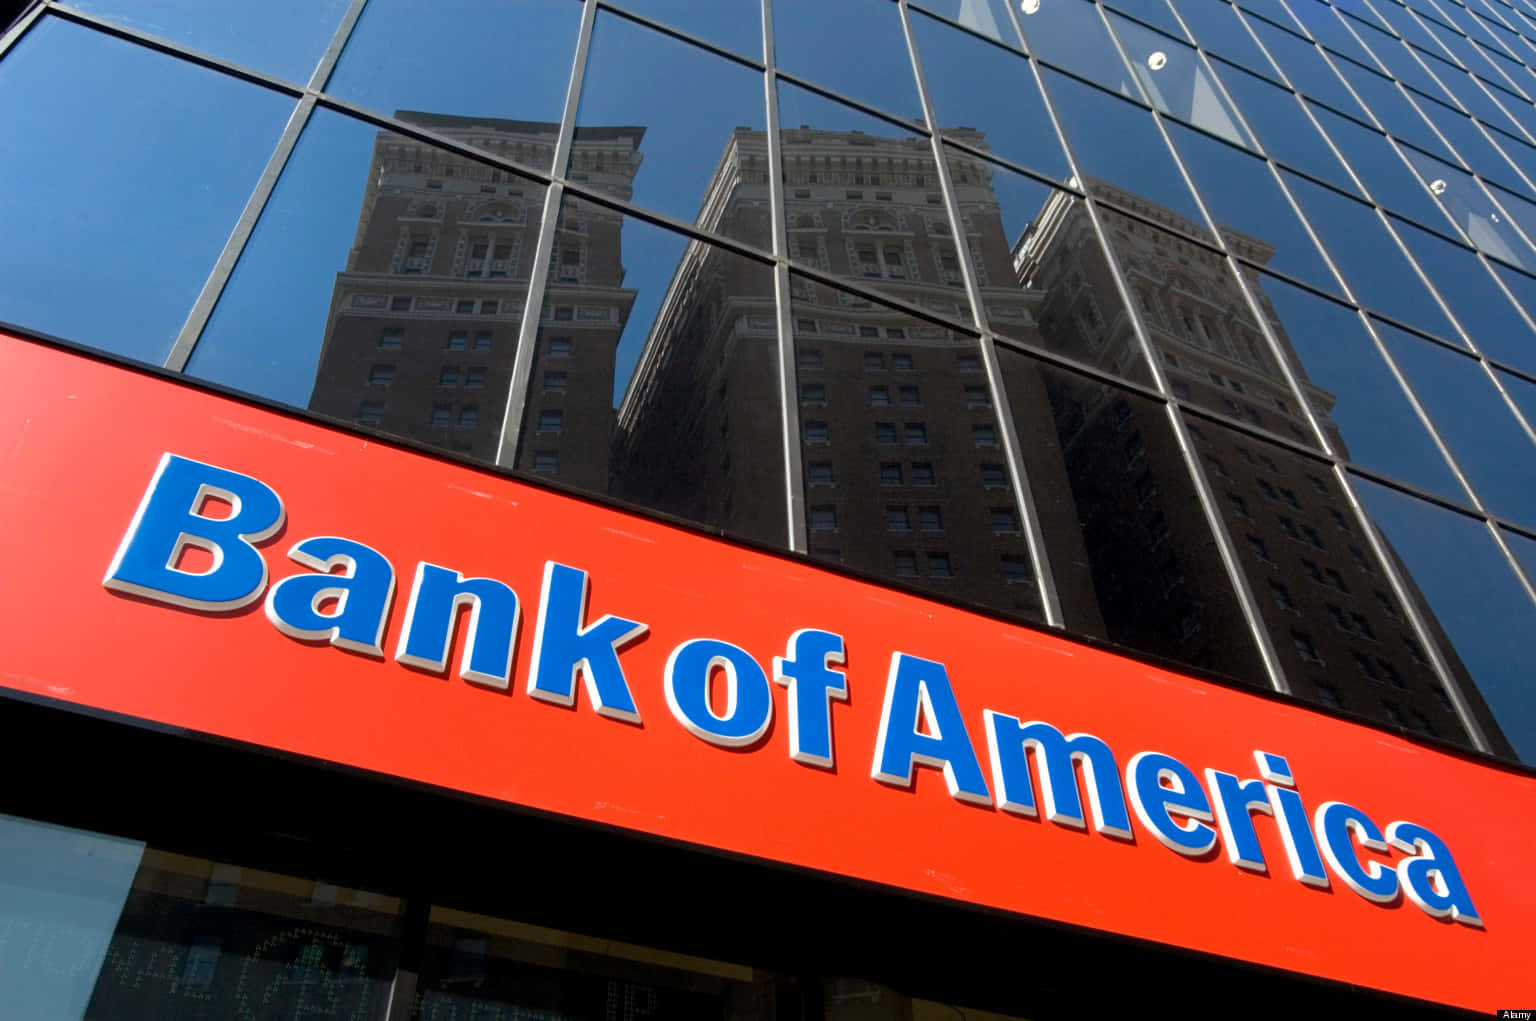 Bank of America provides quality financial services for individuals and businesses